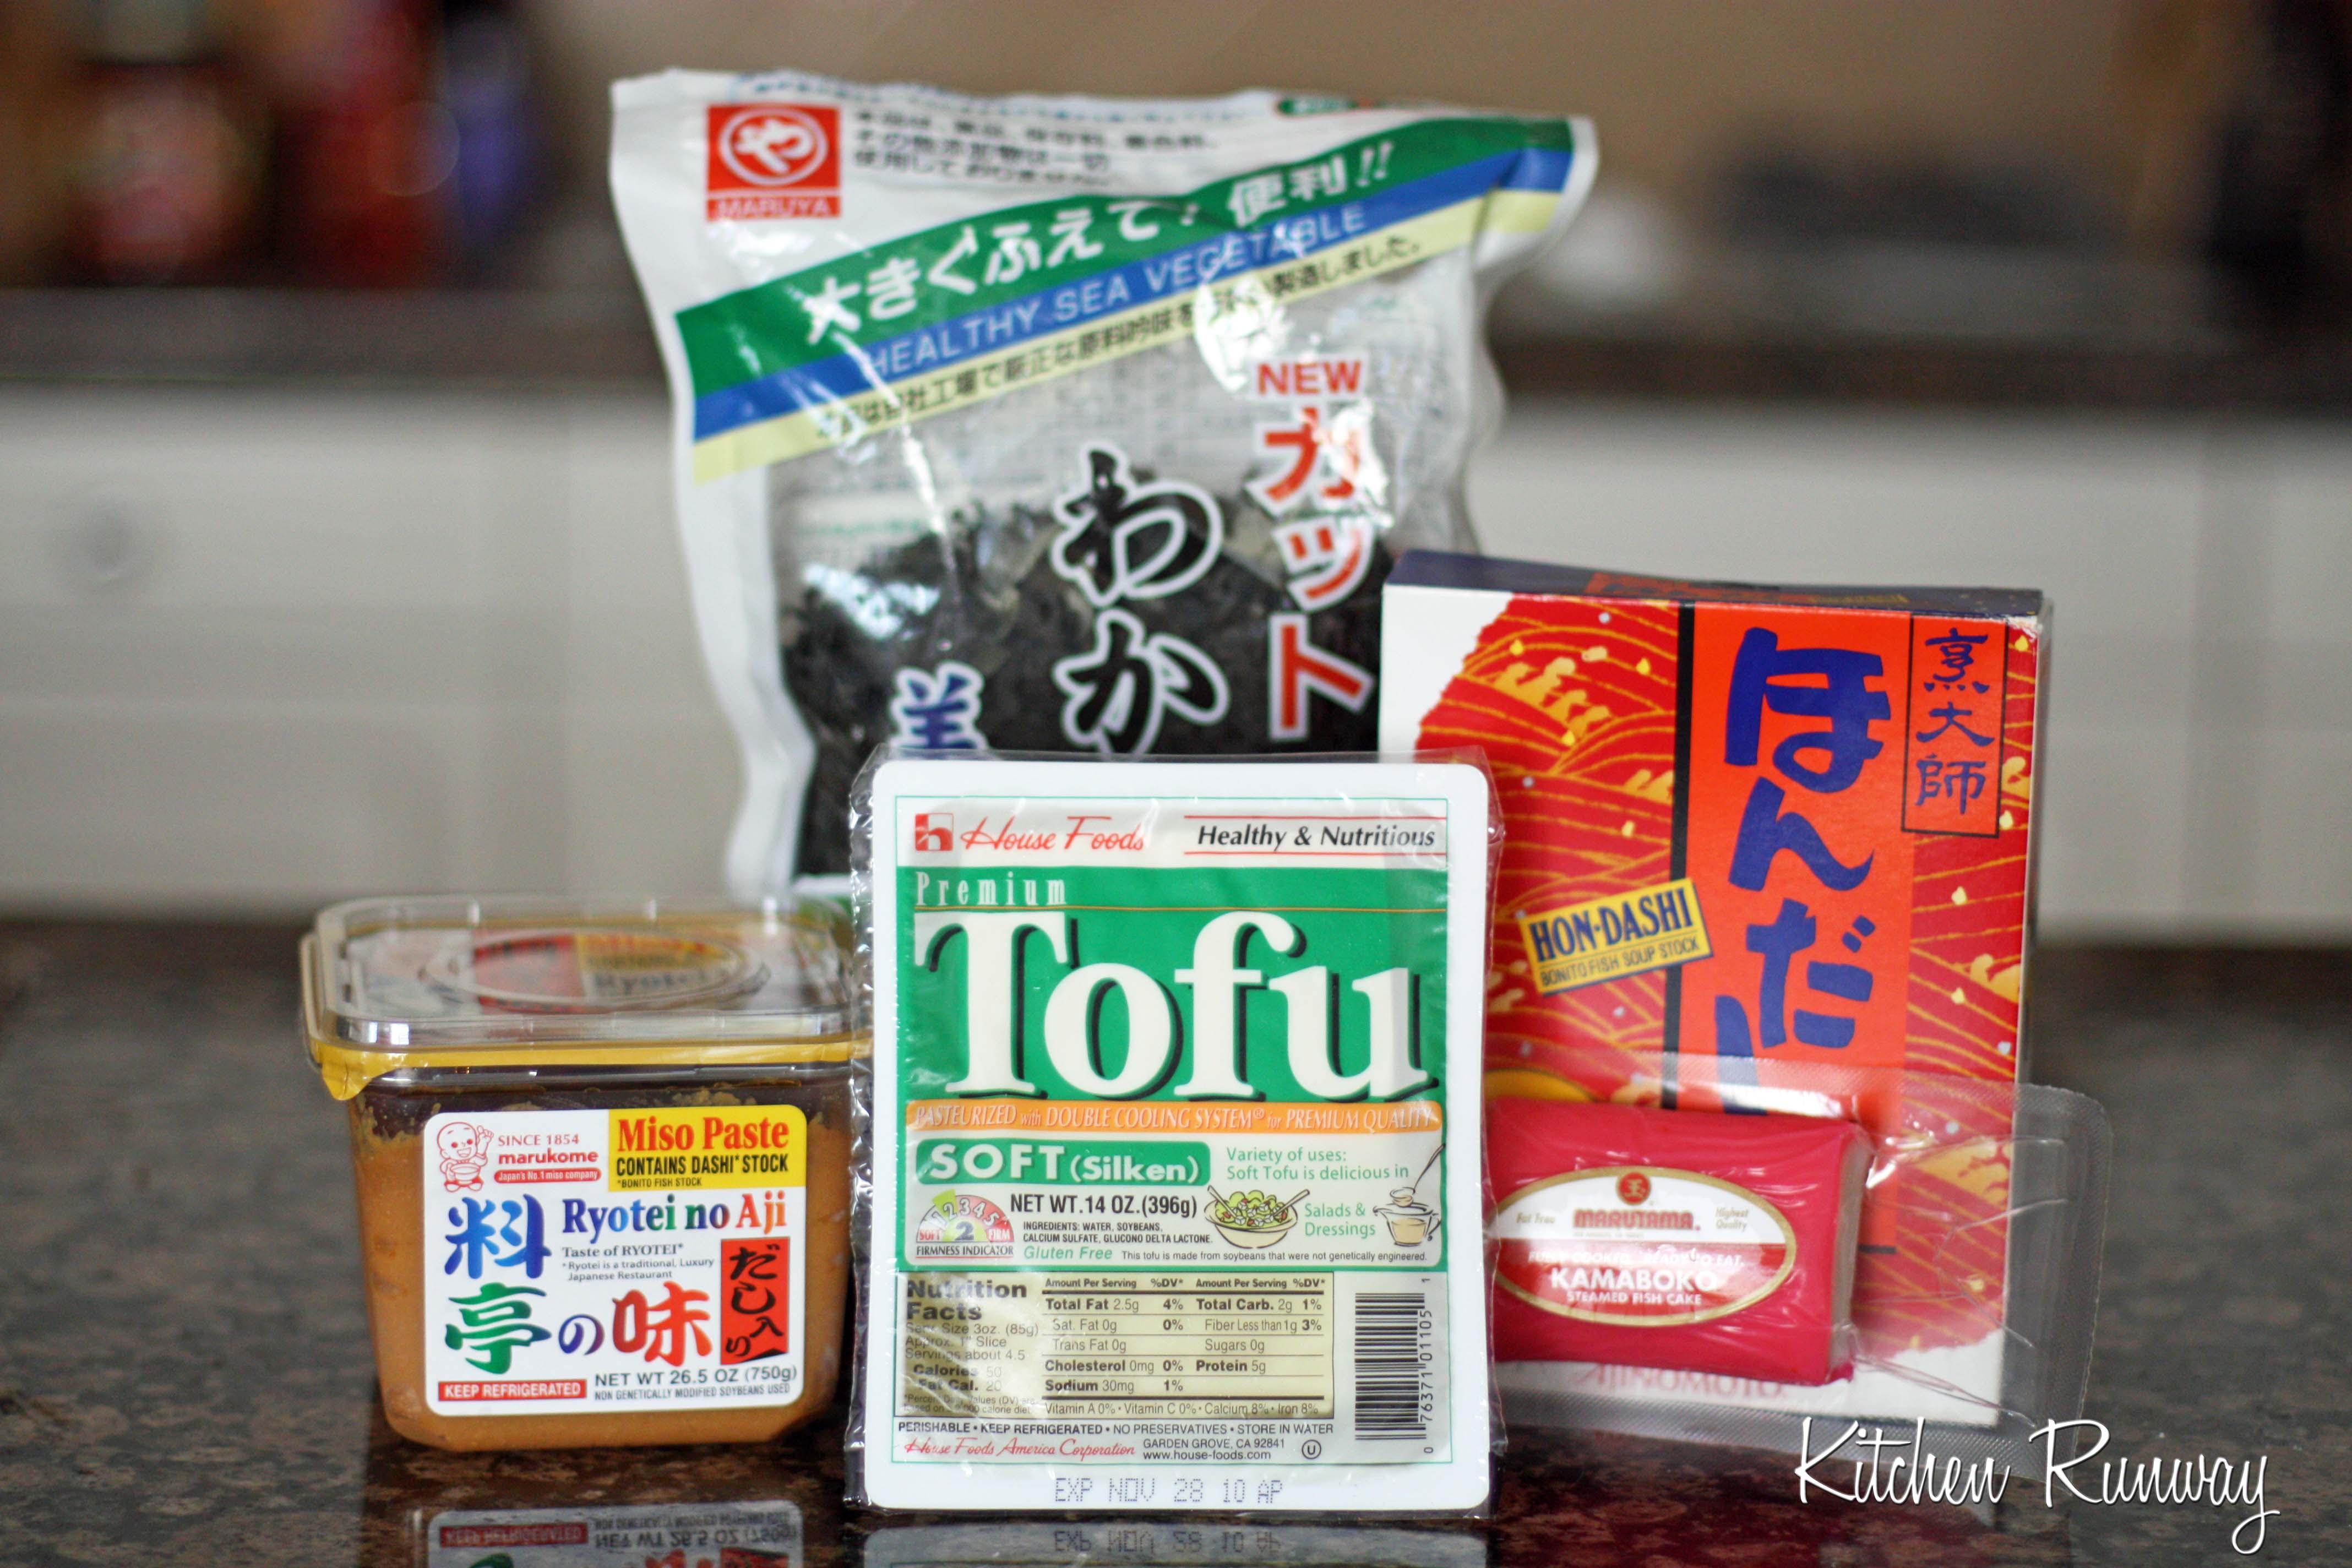 miso soup ingredients